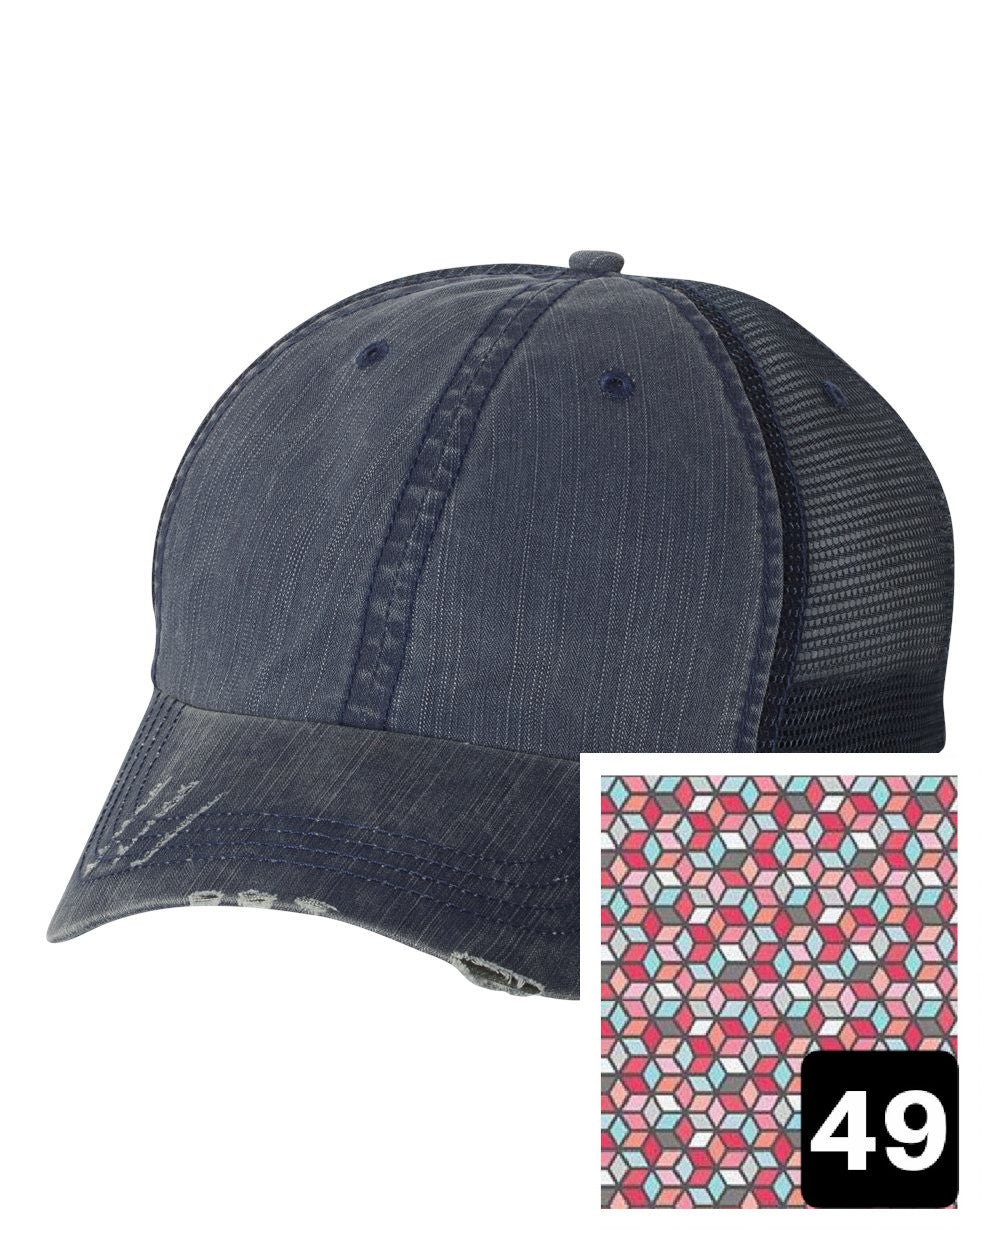 New Hampshire Hat | Navy Distressed Trucker Cap | Many Fabric Choices